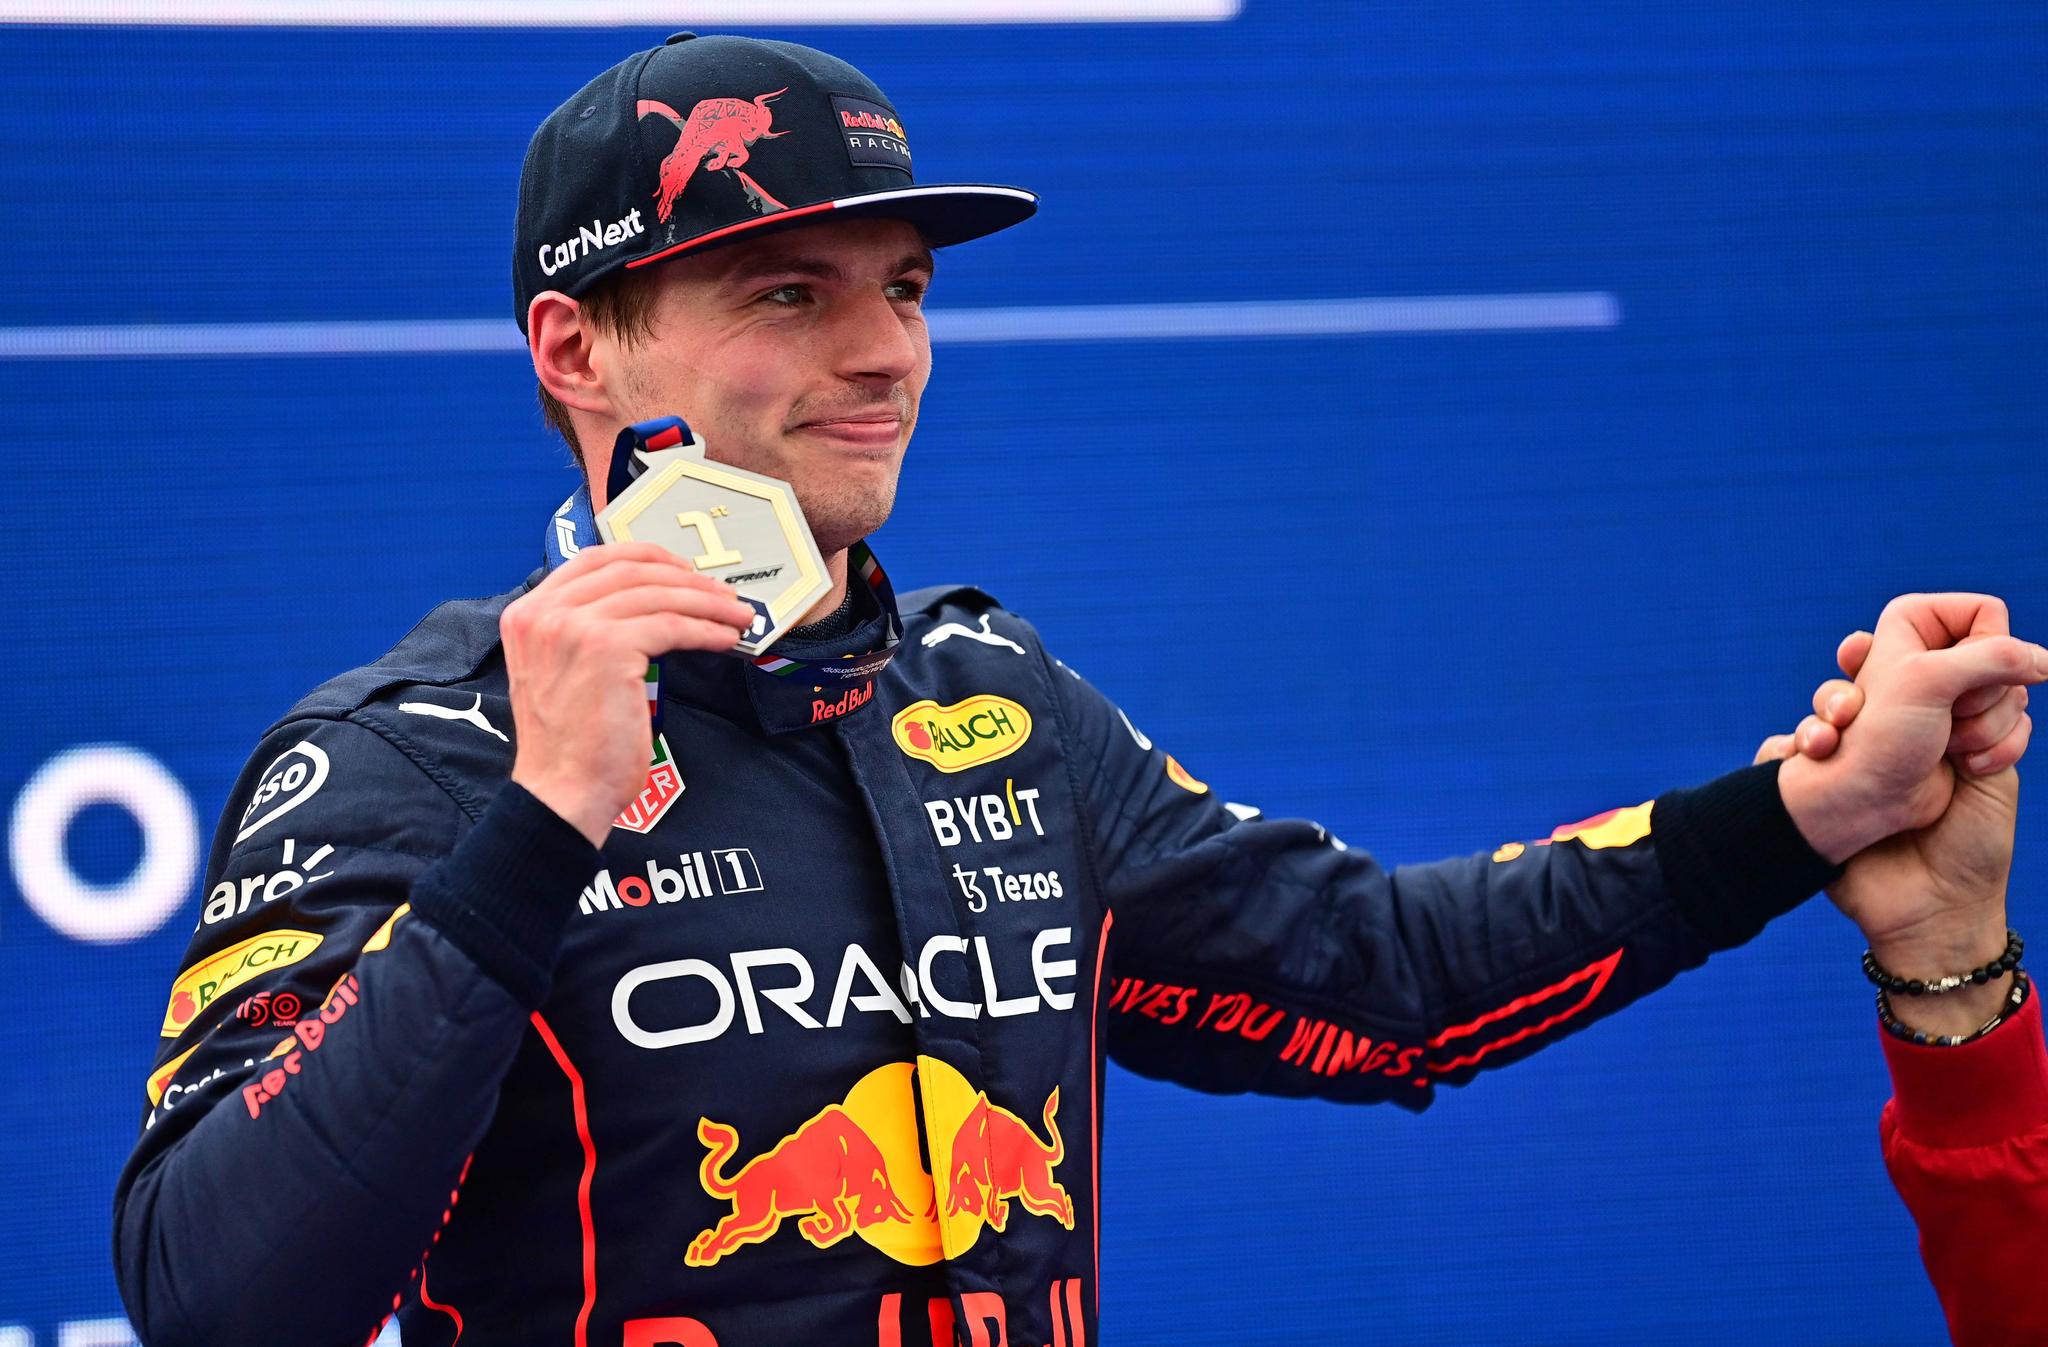 Verstappen hits back after rocky start – Hamilton disappointed again